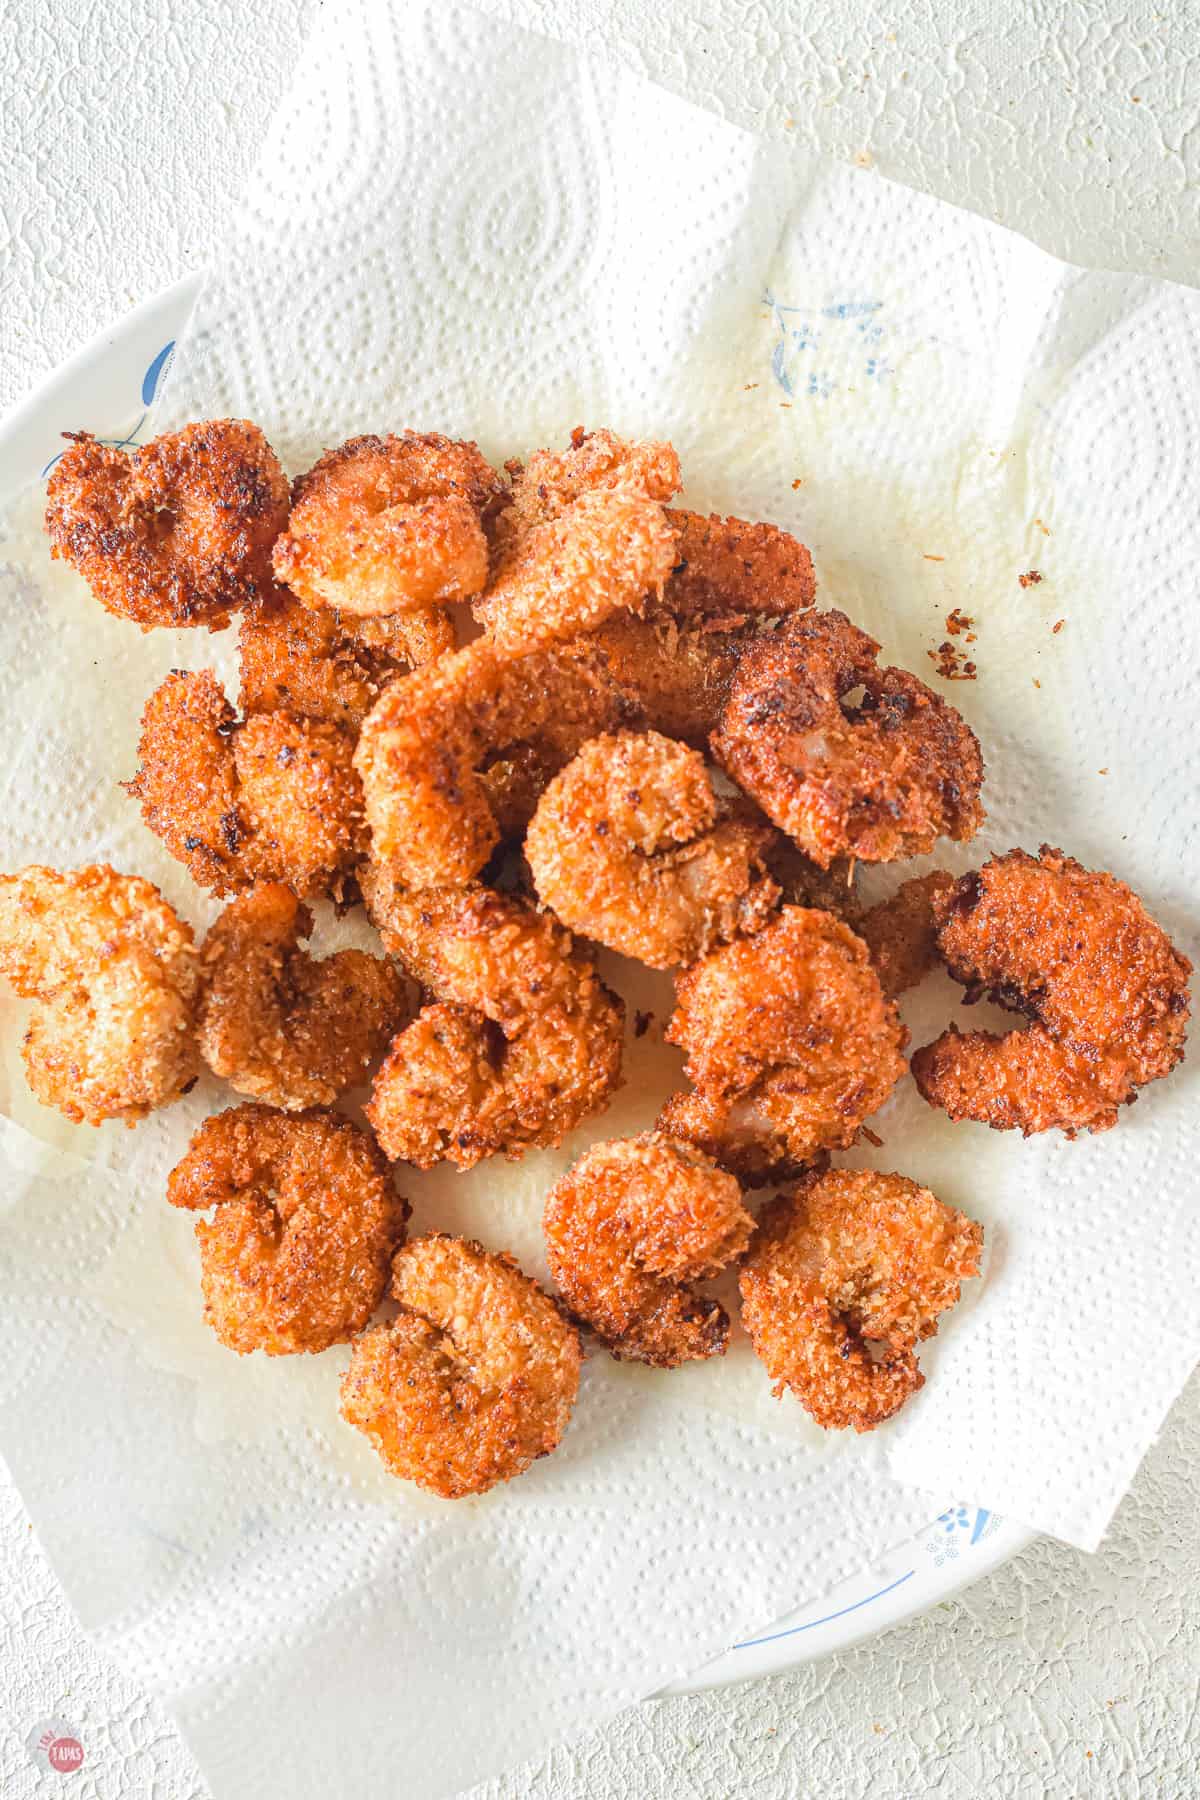 plate with paper towel and a pile of fried shrimp